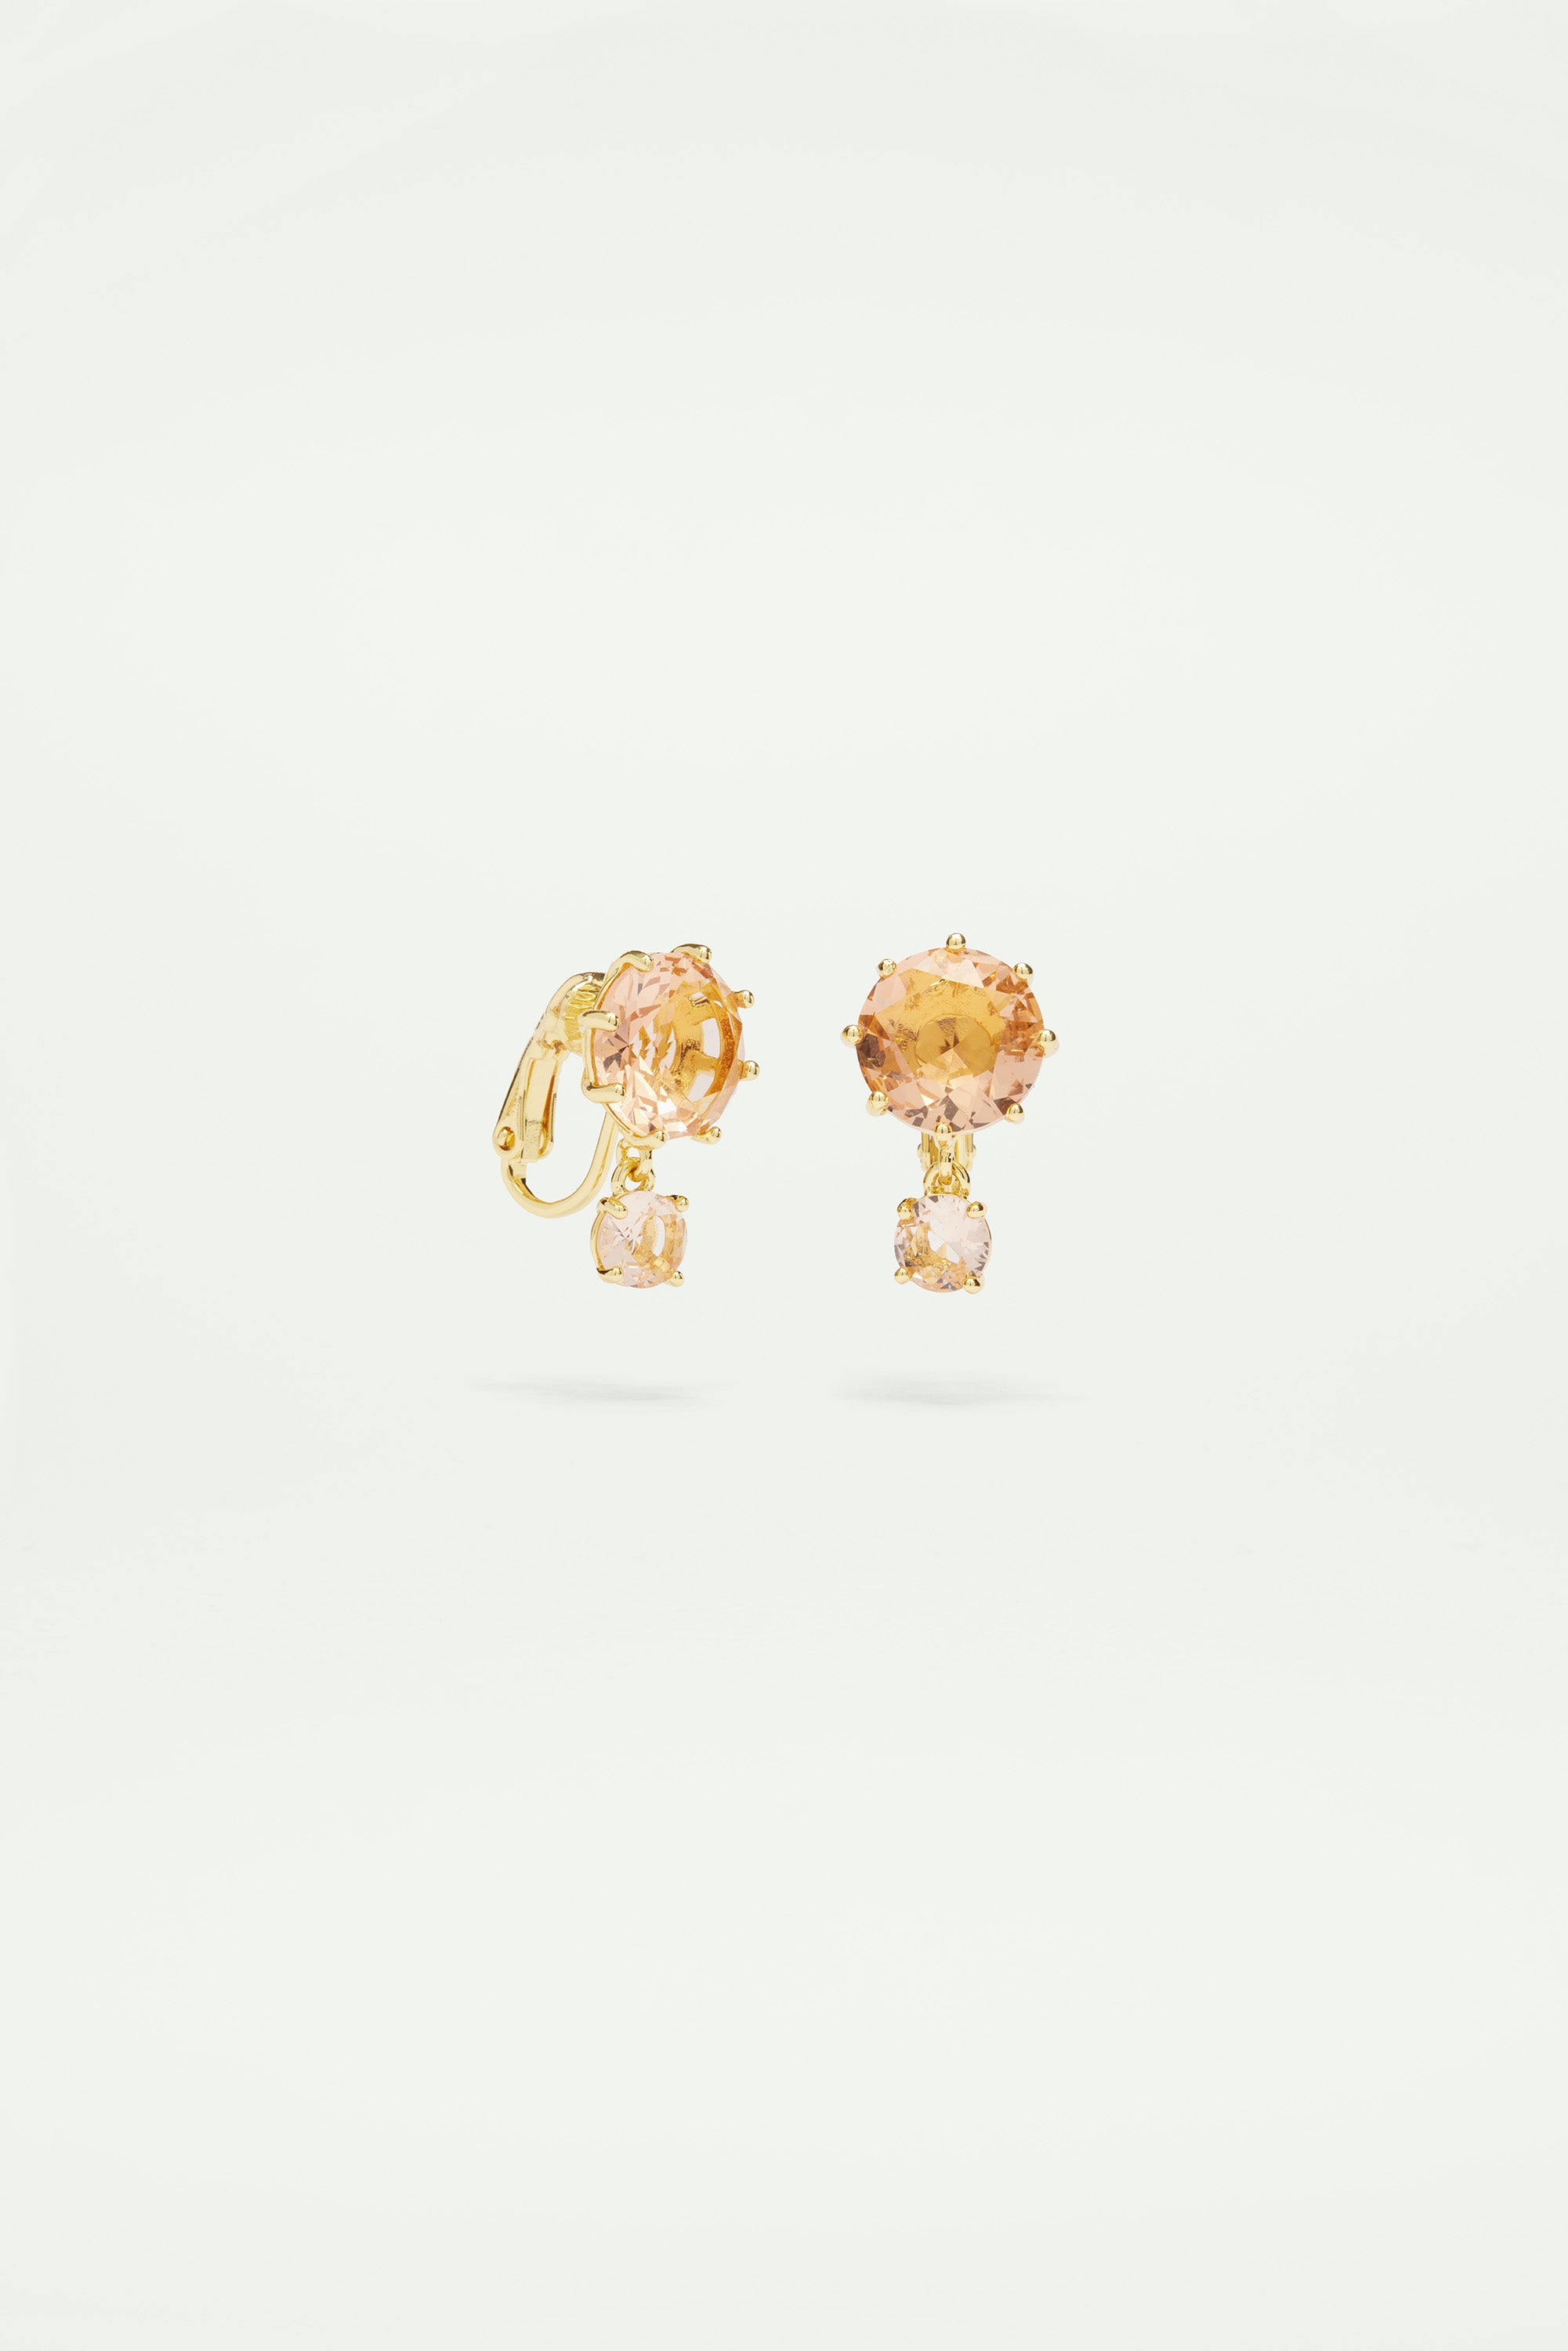 Apricot pink Diamantine 2 round stone post earrings